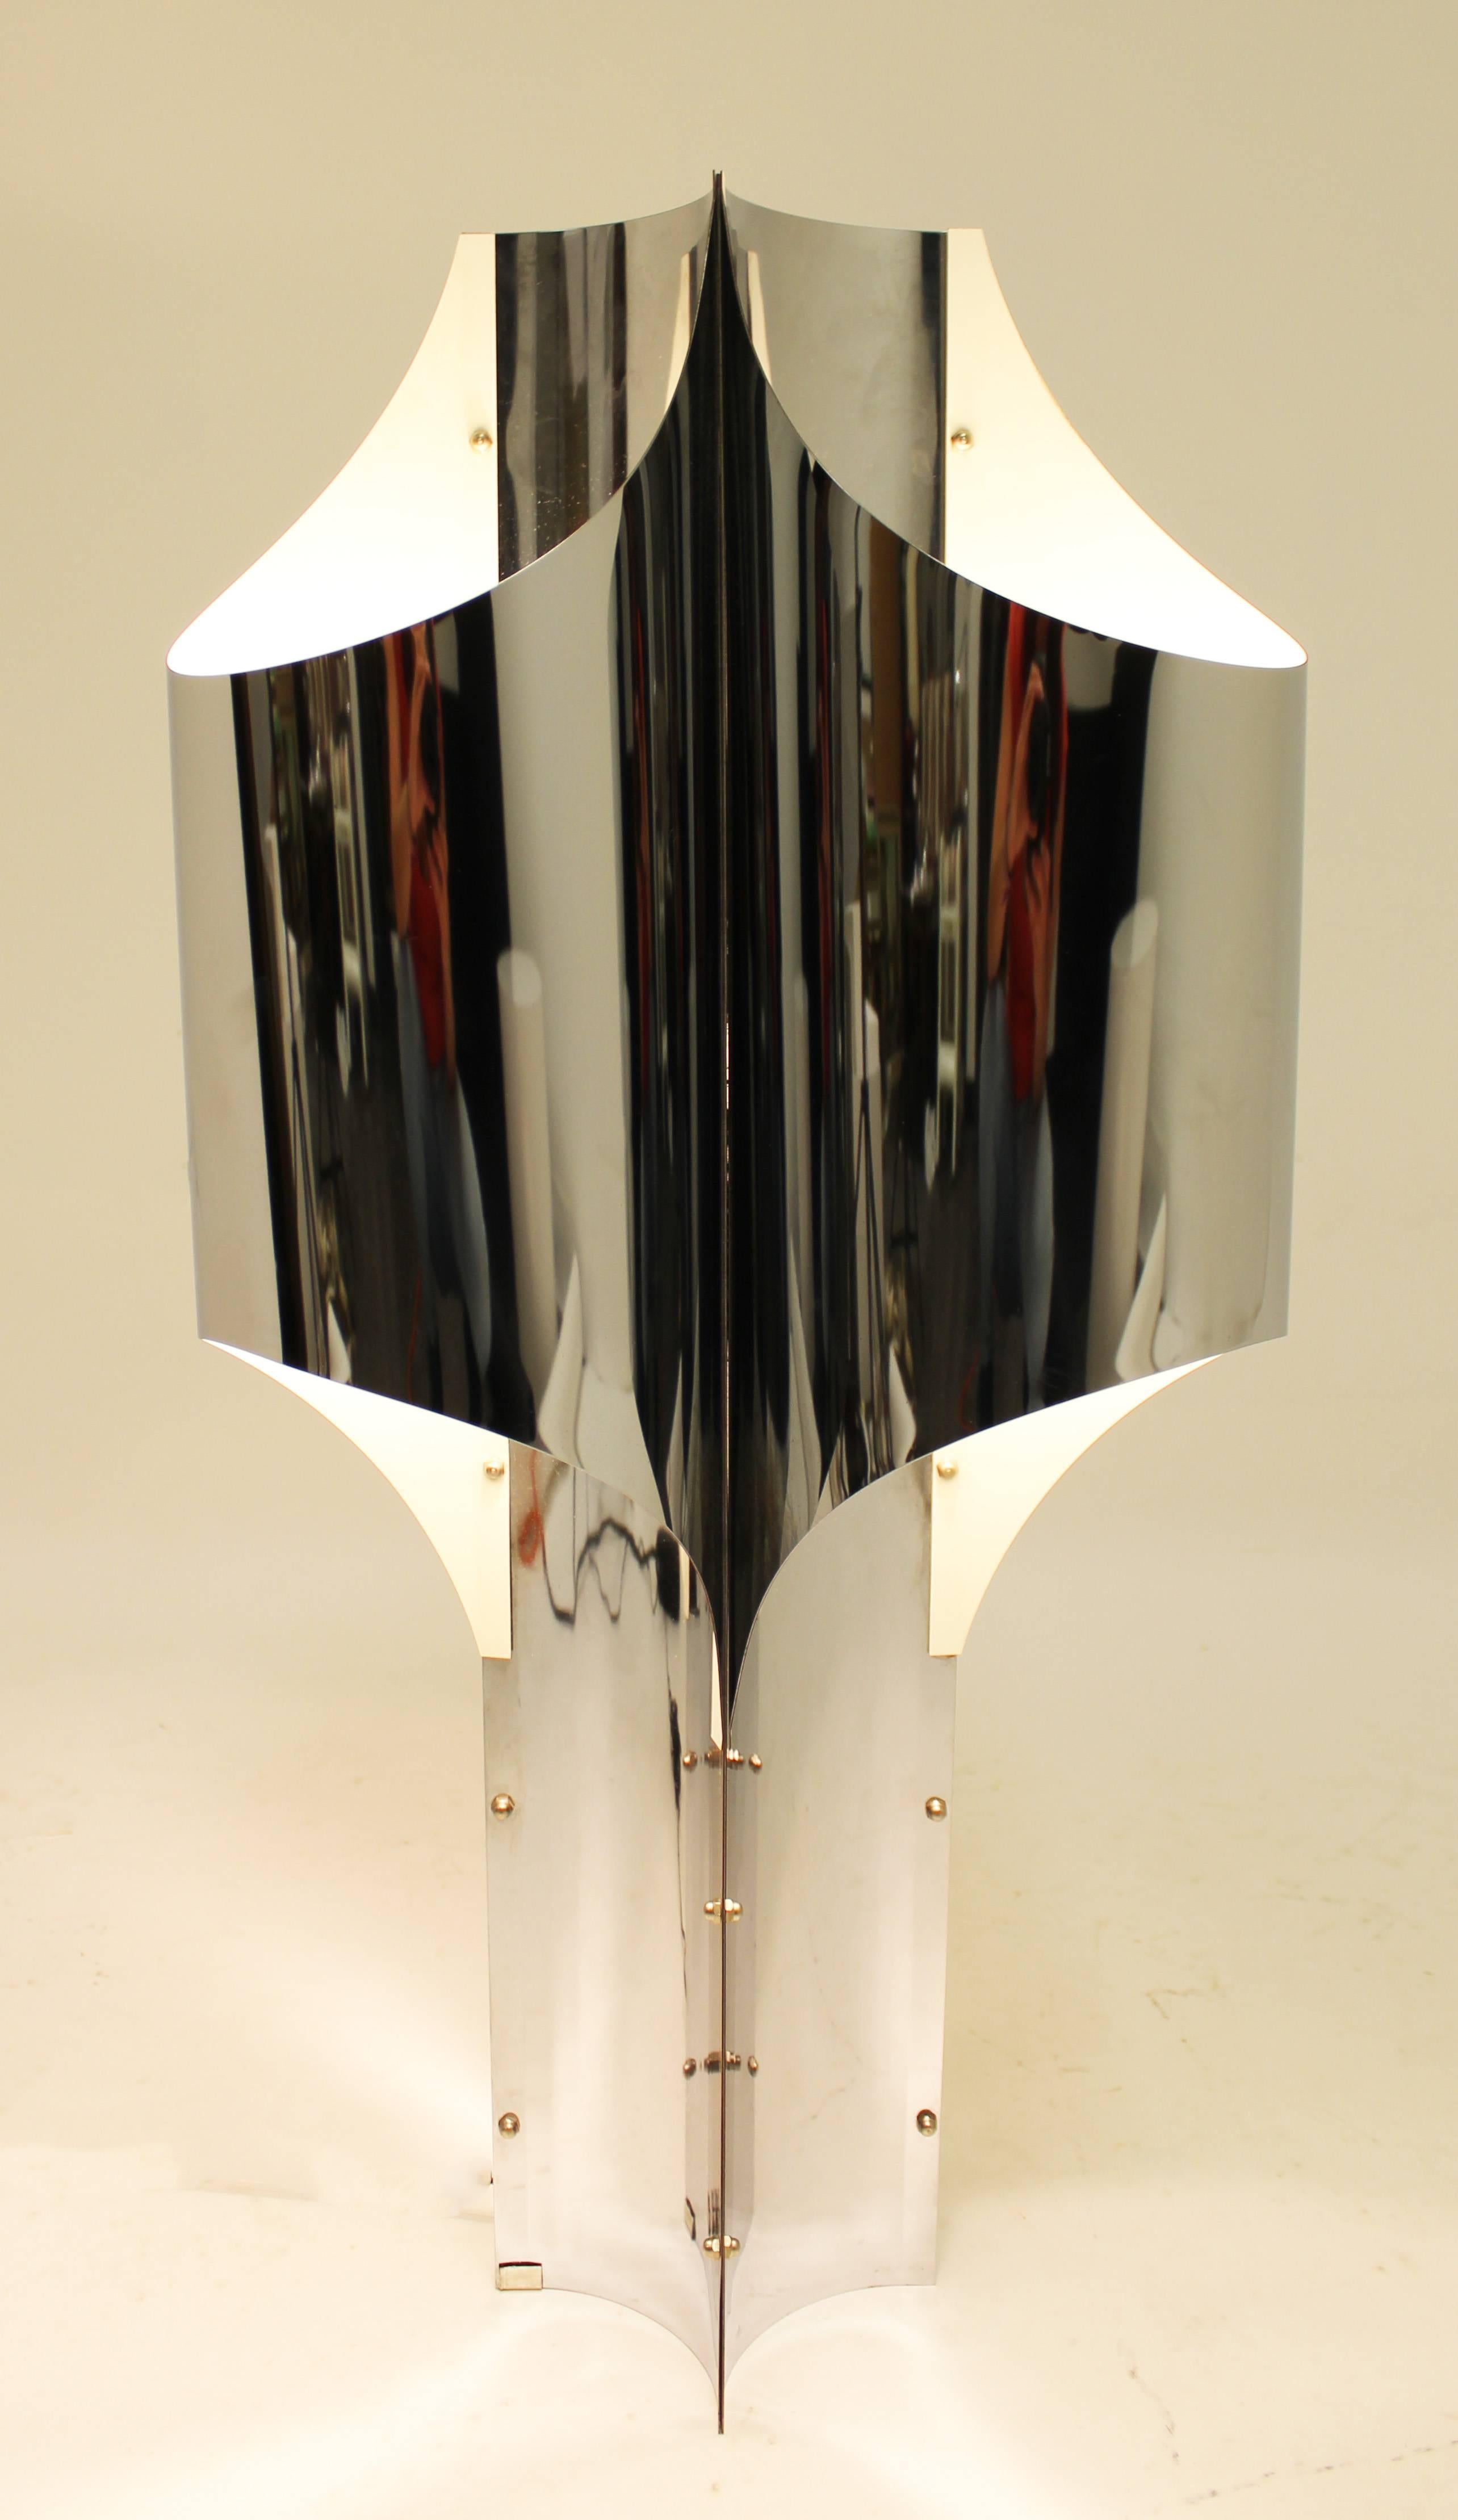 For your consideration is a stunning, reflective, sculptural table lamp, made of aluminum and chrome by Robert Sonneman. In excellent condition. The dimensions are 19